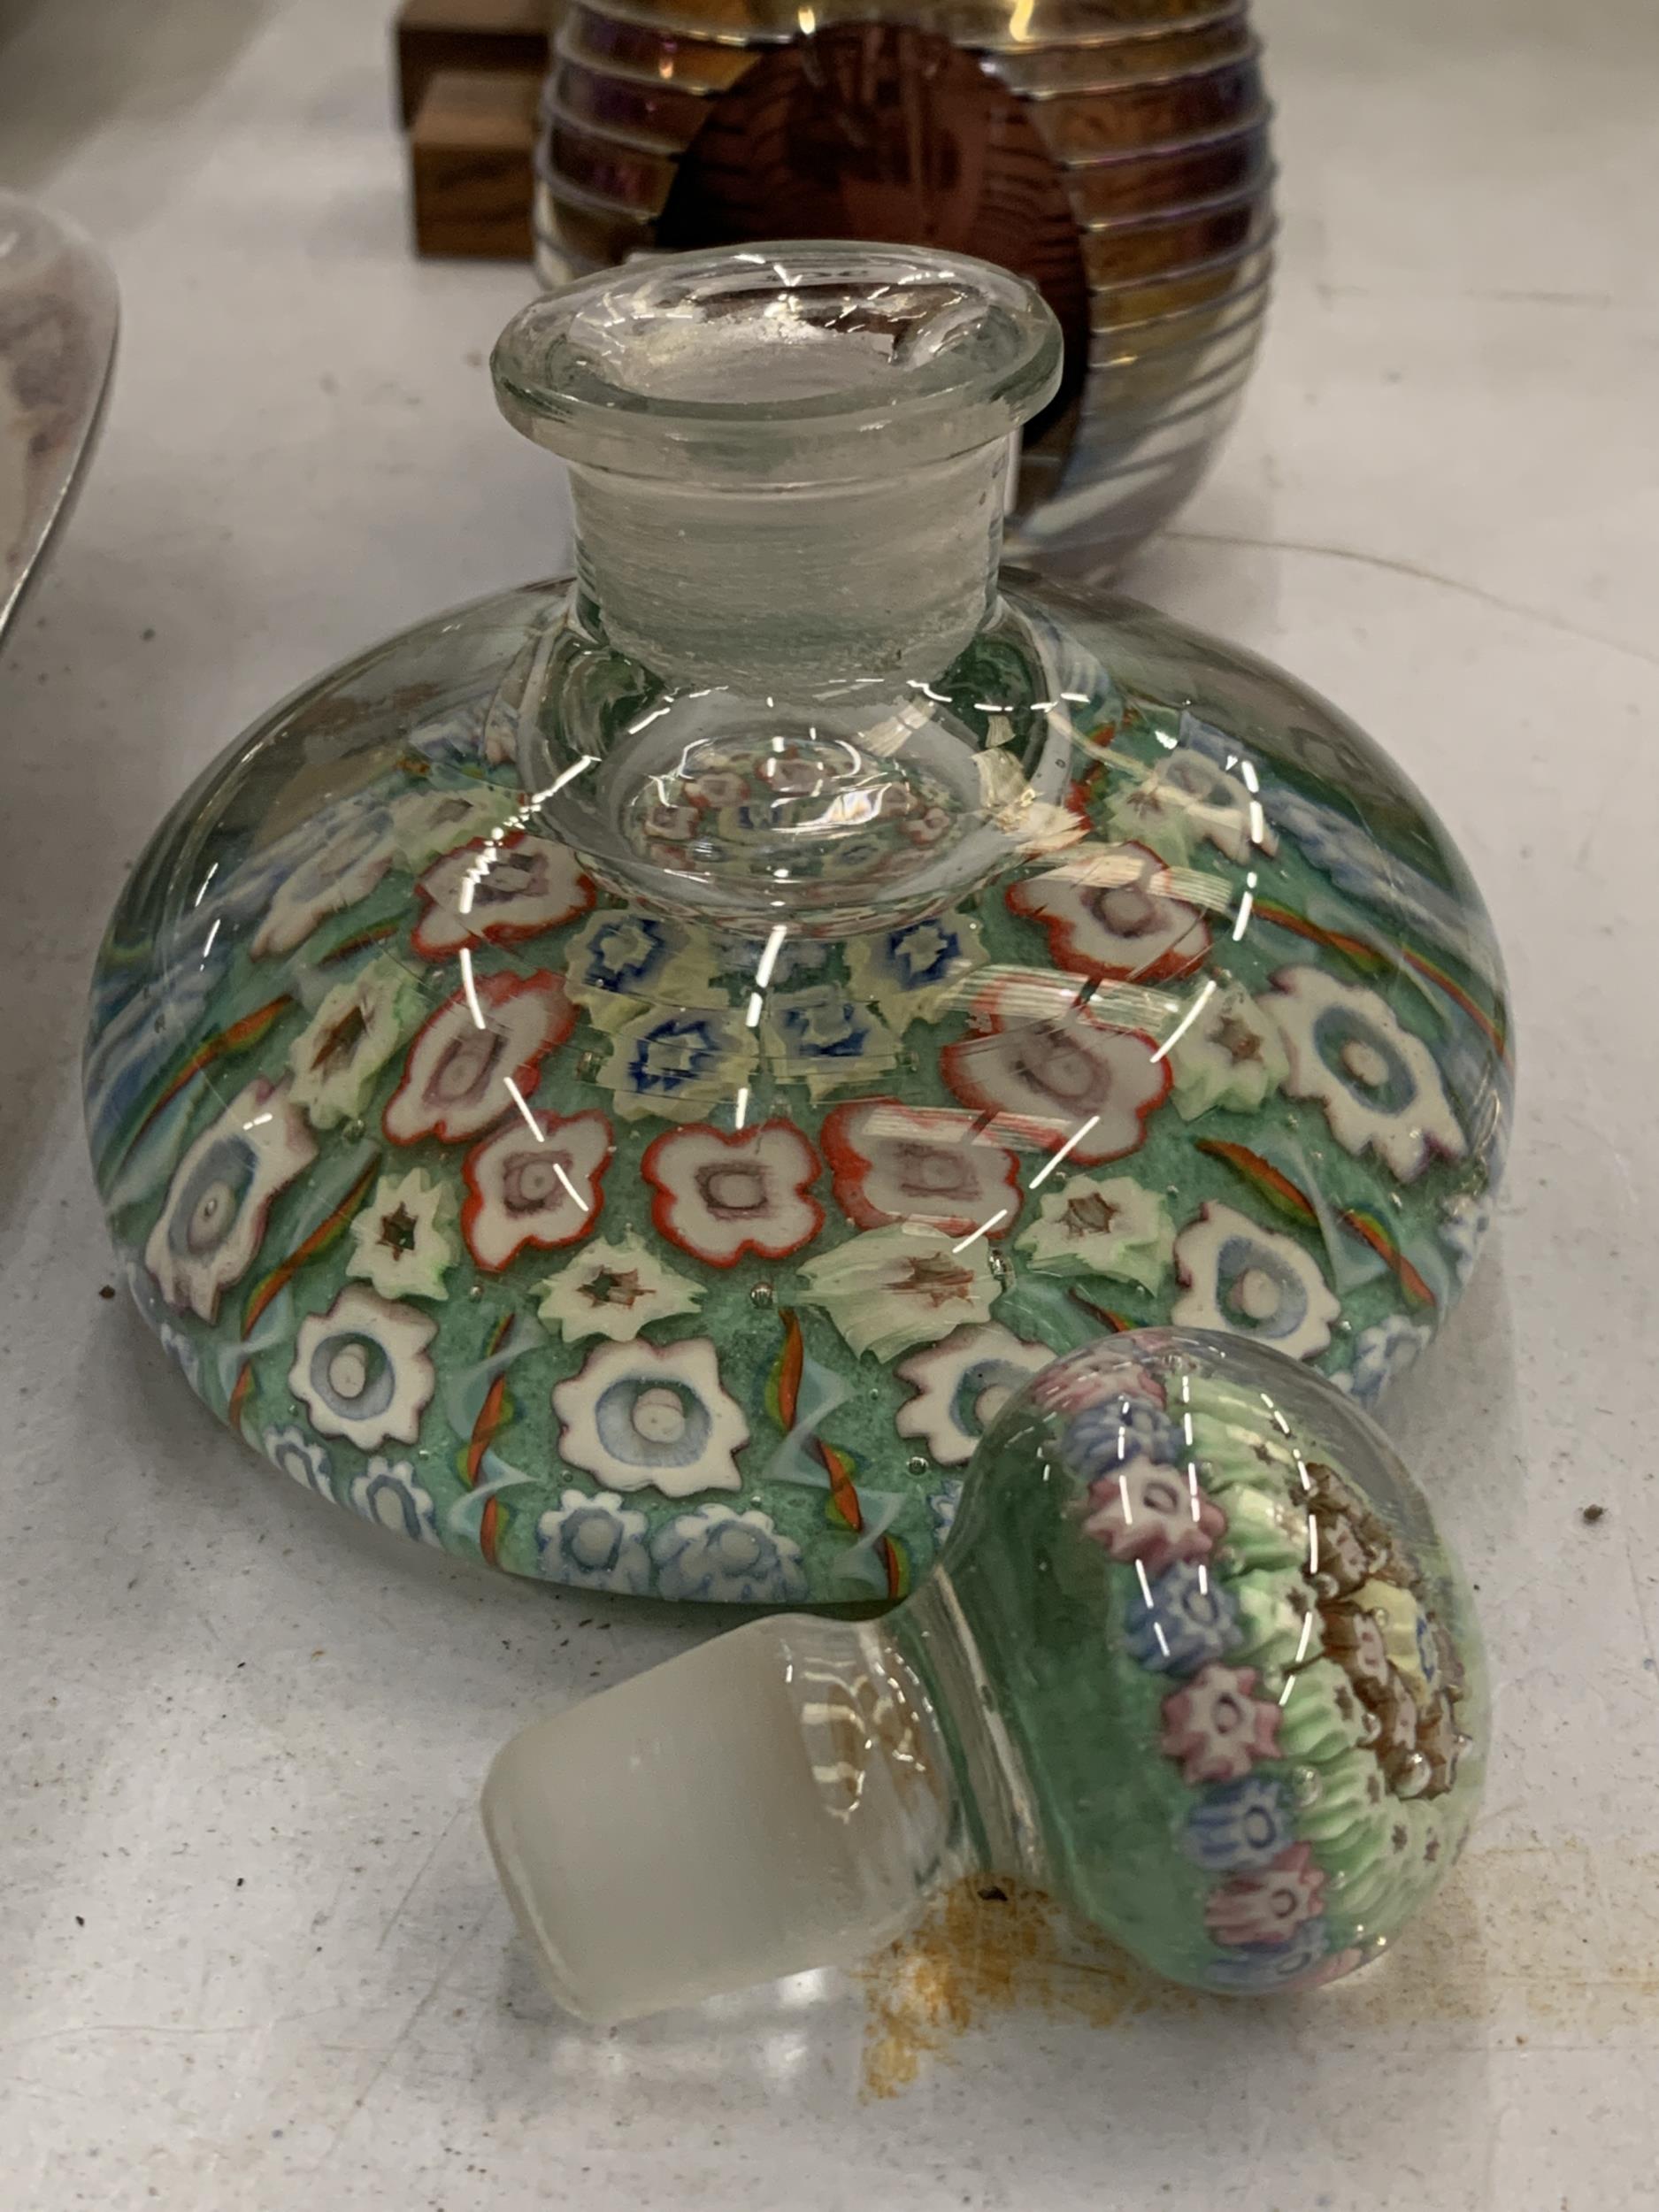 A MILLEFIORI GLASS PAPERWEIGHT INK BOTTLE WITH STOPPER - Image 2 of 3